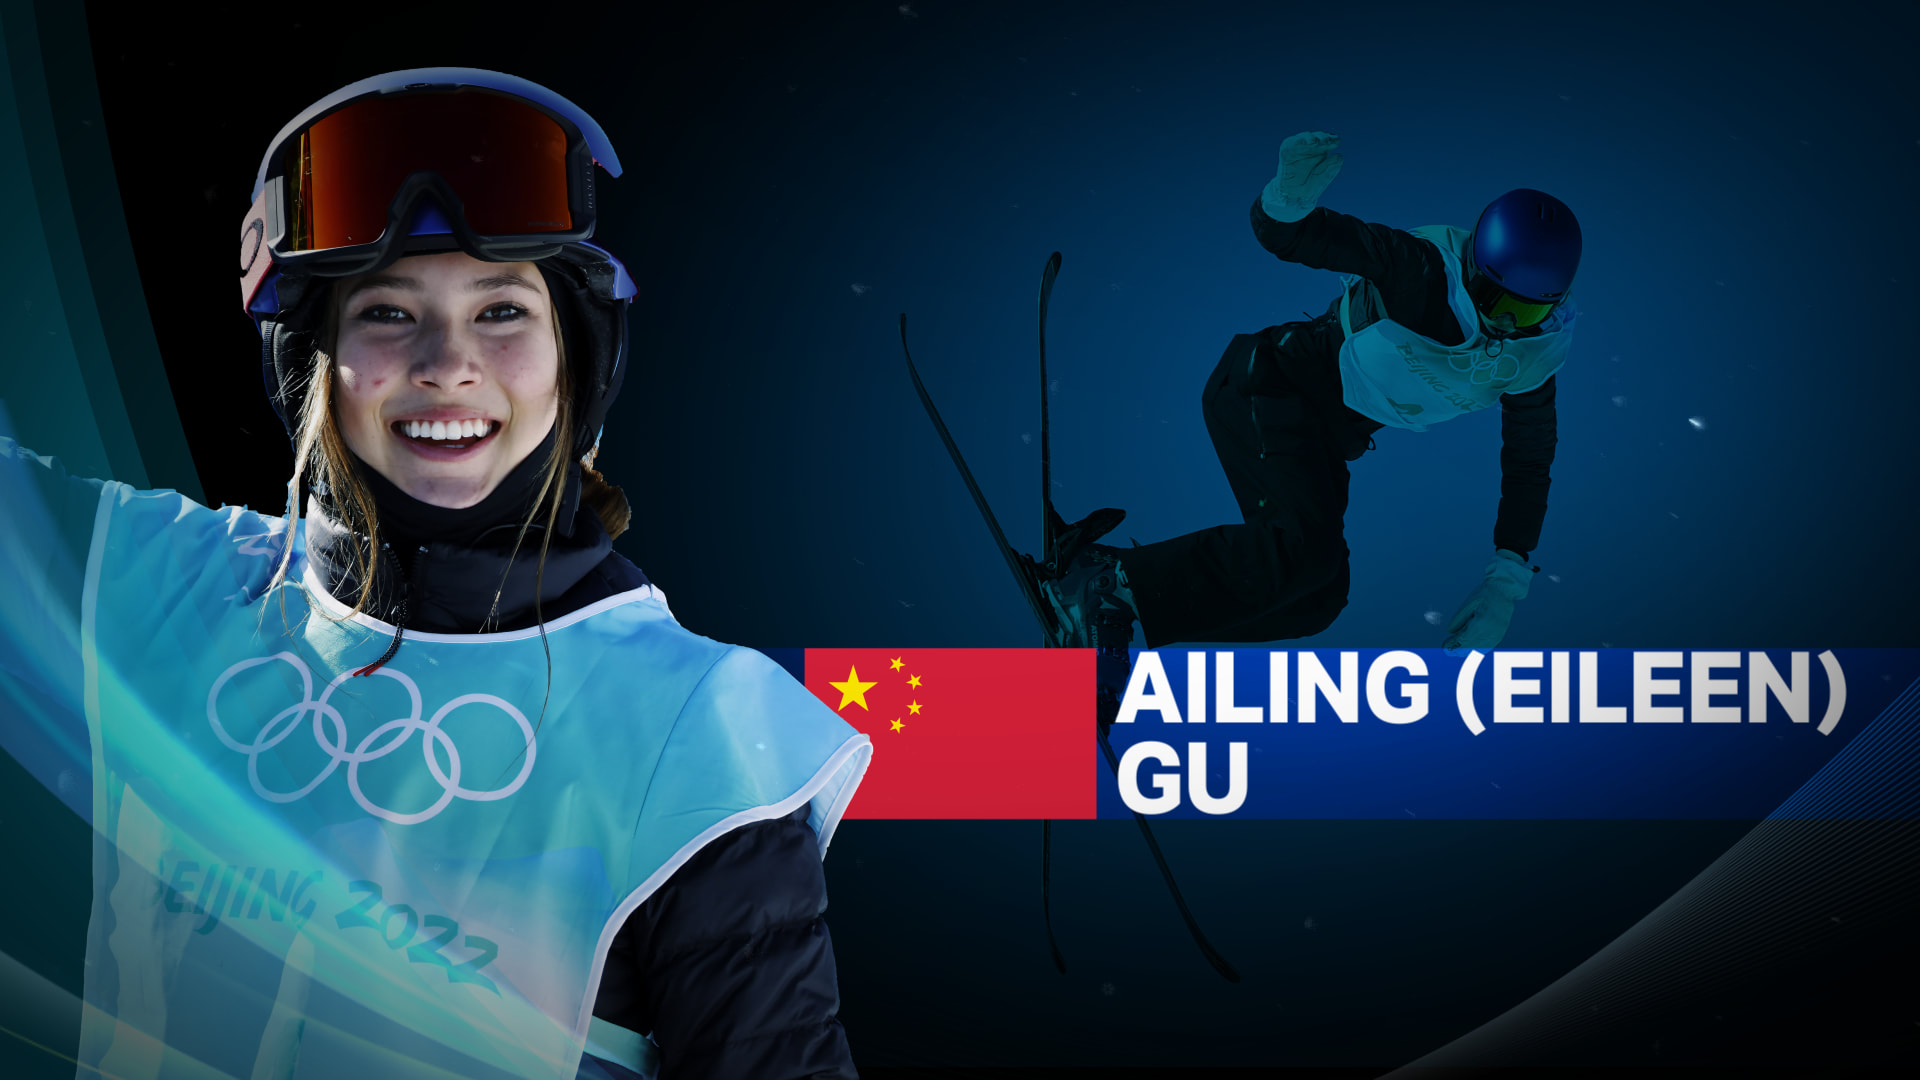 Freestyle skier Eileen Gu Ailing attends IWC event on August 1